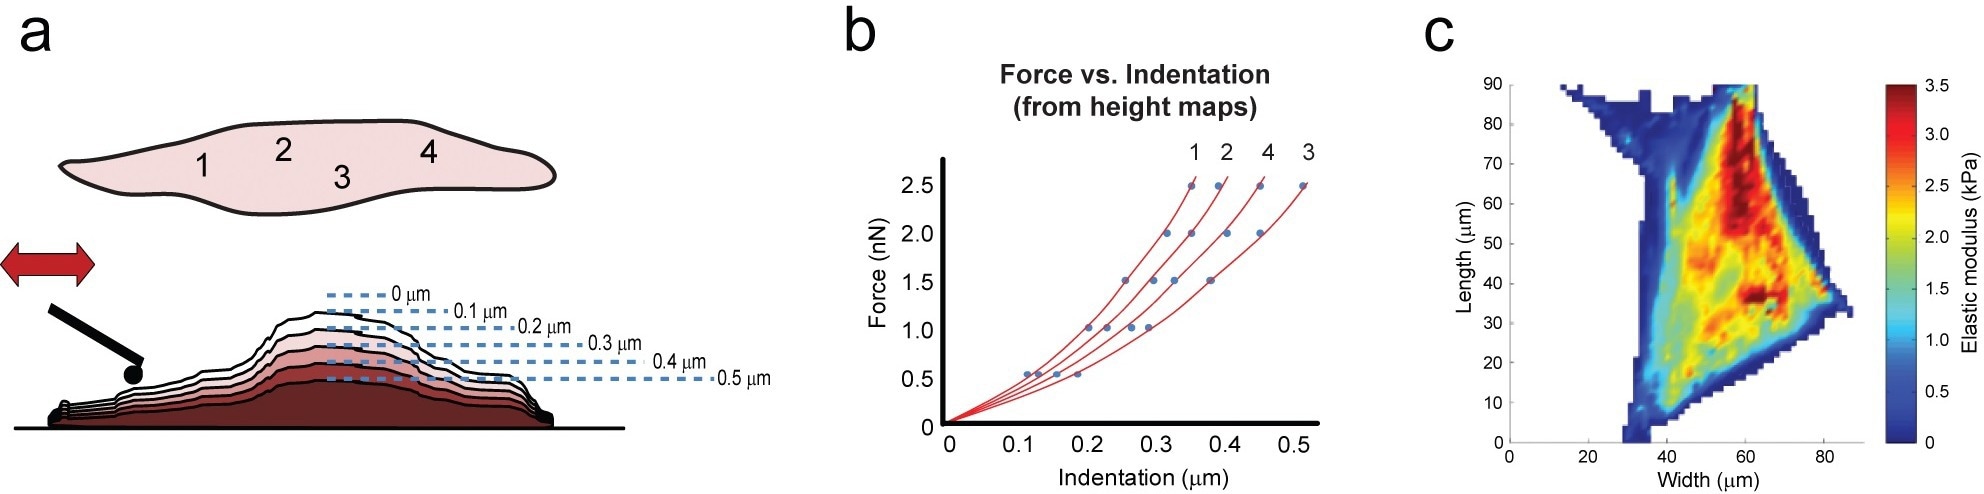 Force scanning involves combining a series of contact-mode scans that deform a material with incrementally larger setpoint forces (a). Using height and setpoint data, force vs. indentation curves can be constructed for all points across a sample, which are then fit with mathematical models to obtain mechanical properties (b). Overlaying this information on the sample can reveal structure-property relationships (c).